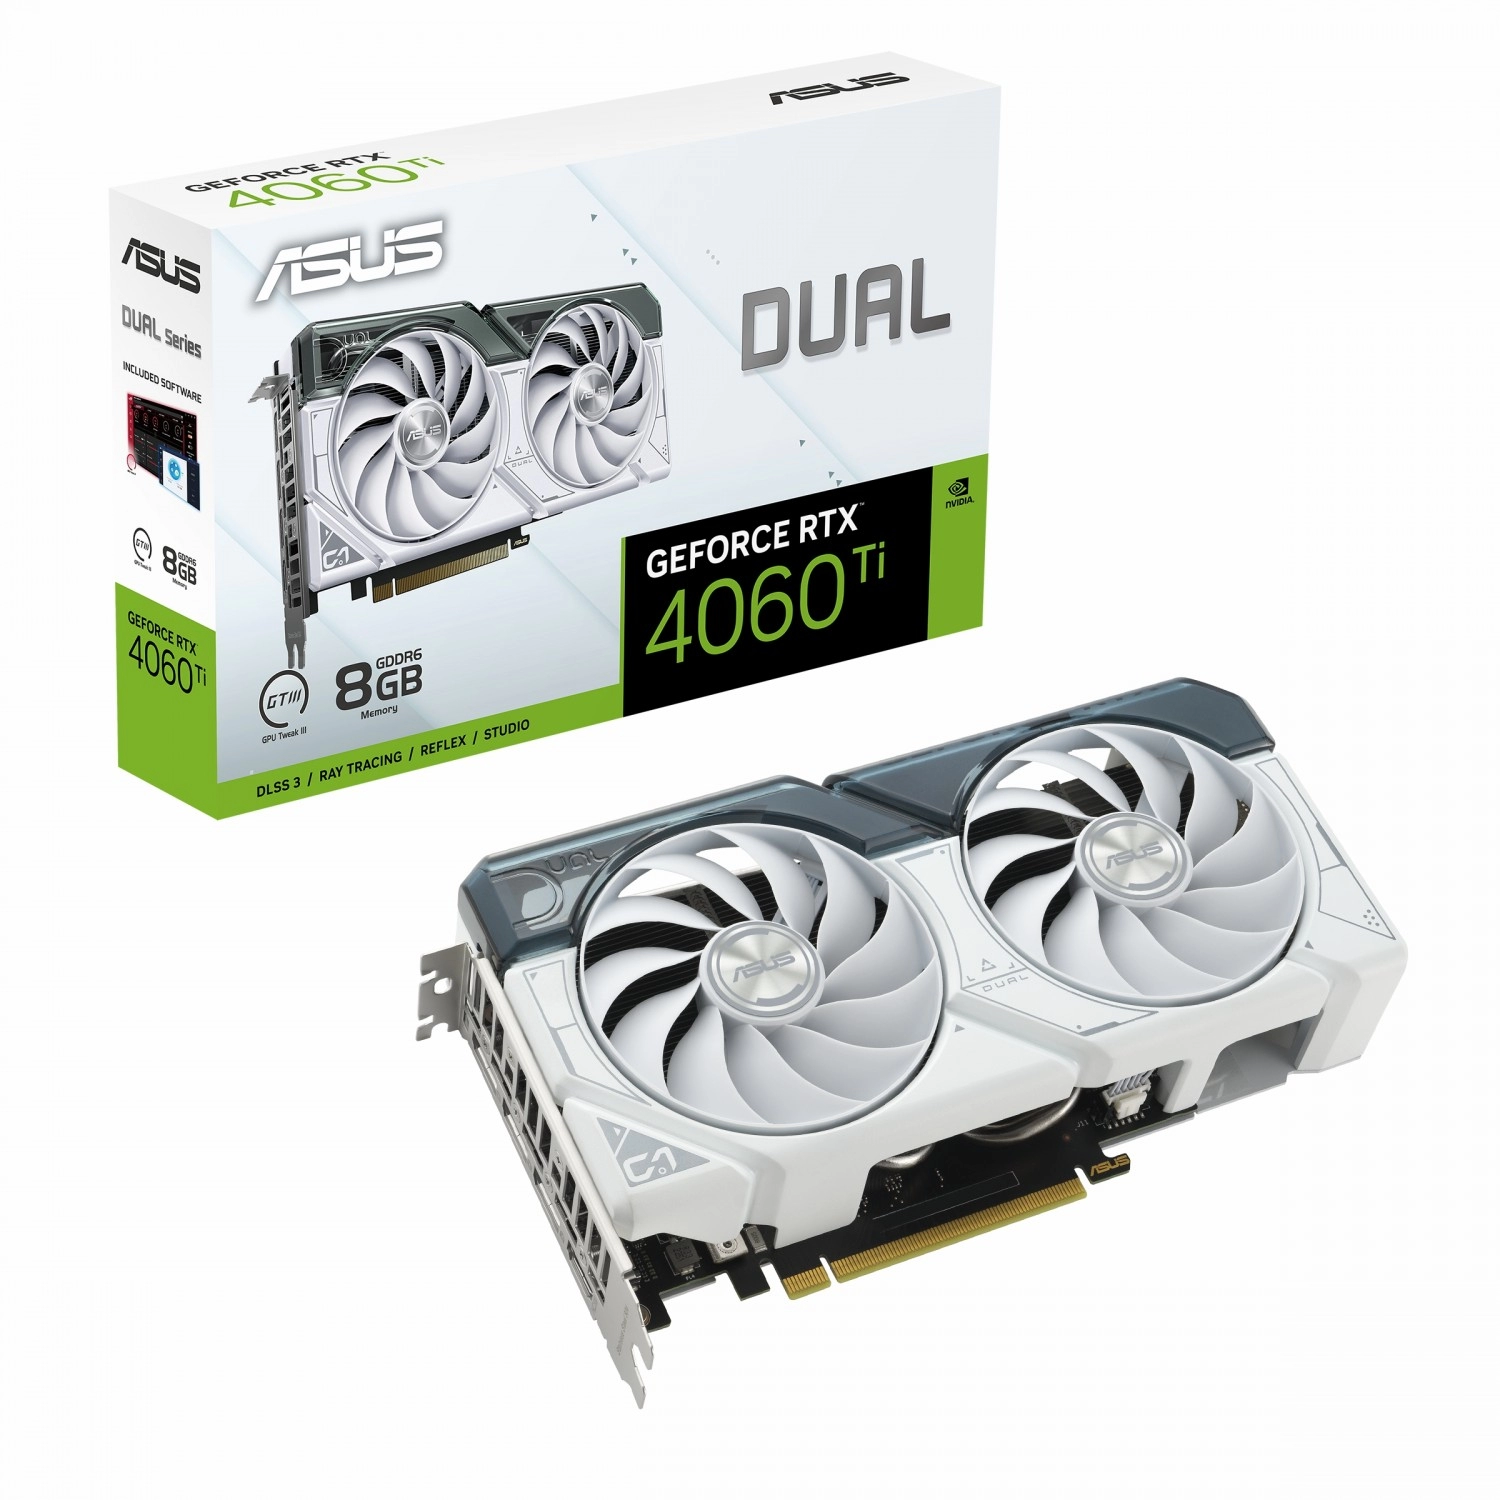 ASUS Dual GeForce RTX 4060 Ti White 8GB GDDR6 Package